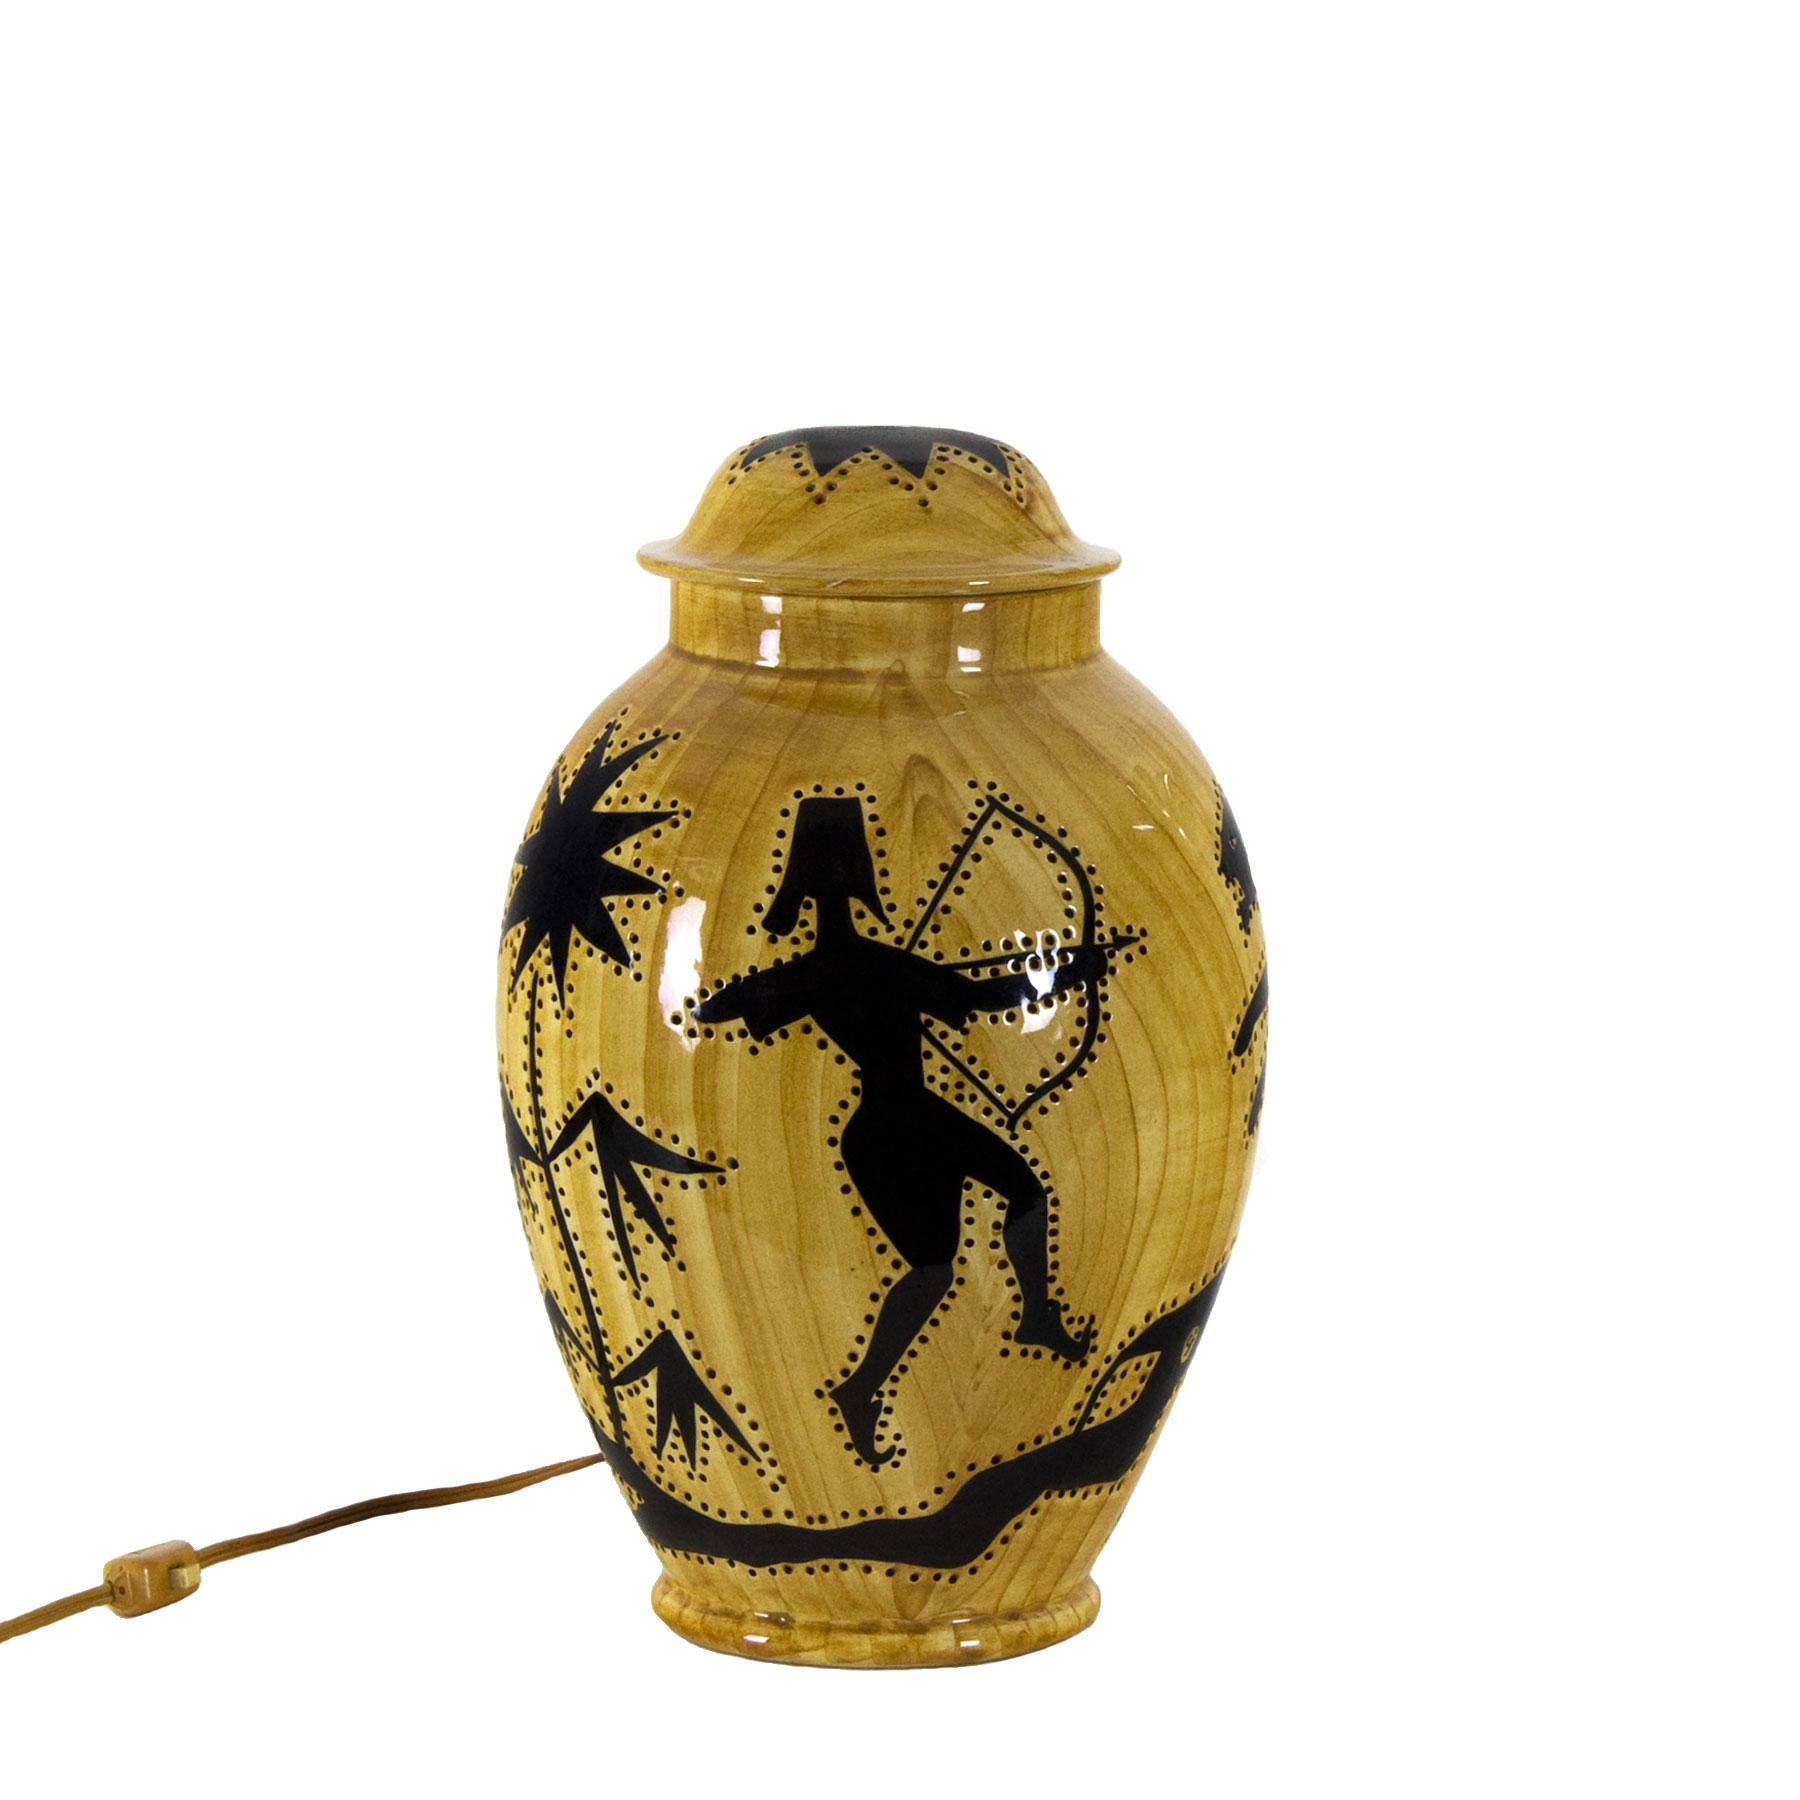 Covered pot forming a lamp, perforated ceramic decorated with fake olive wood and a hunting scene in Africanist style.
Design: Grandjean - Jourdan

France, Vallauris circa 1950.